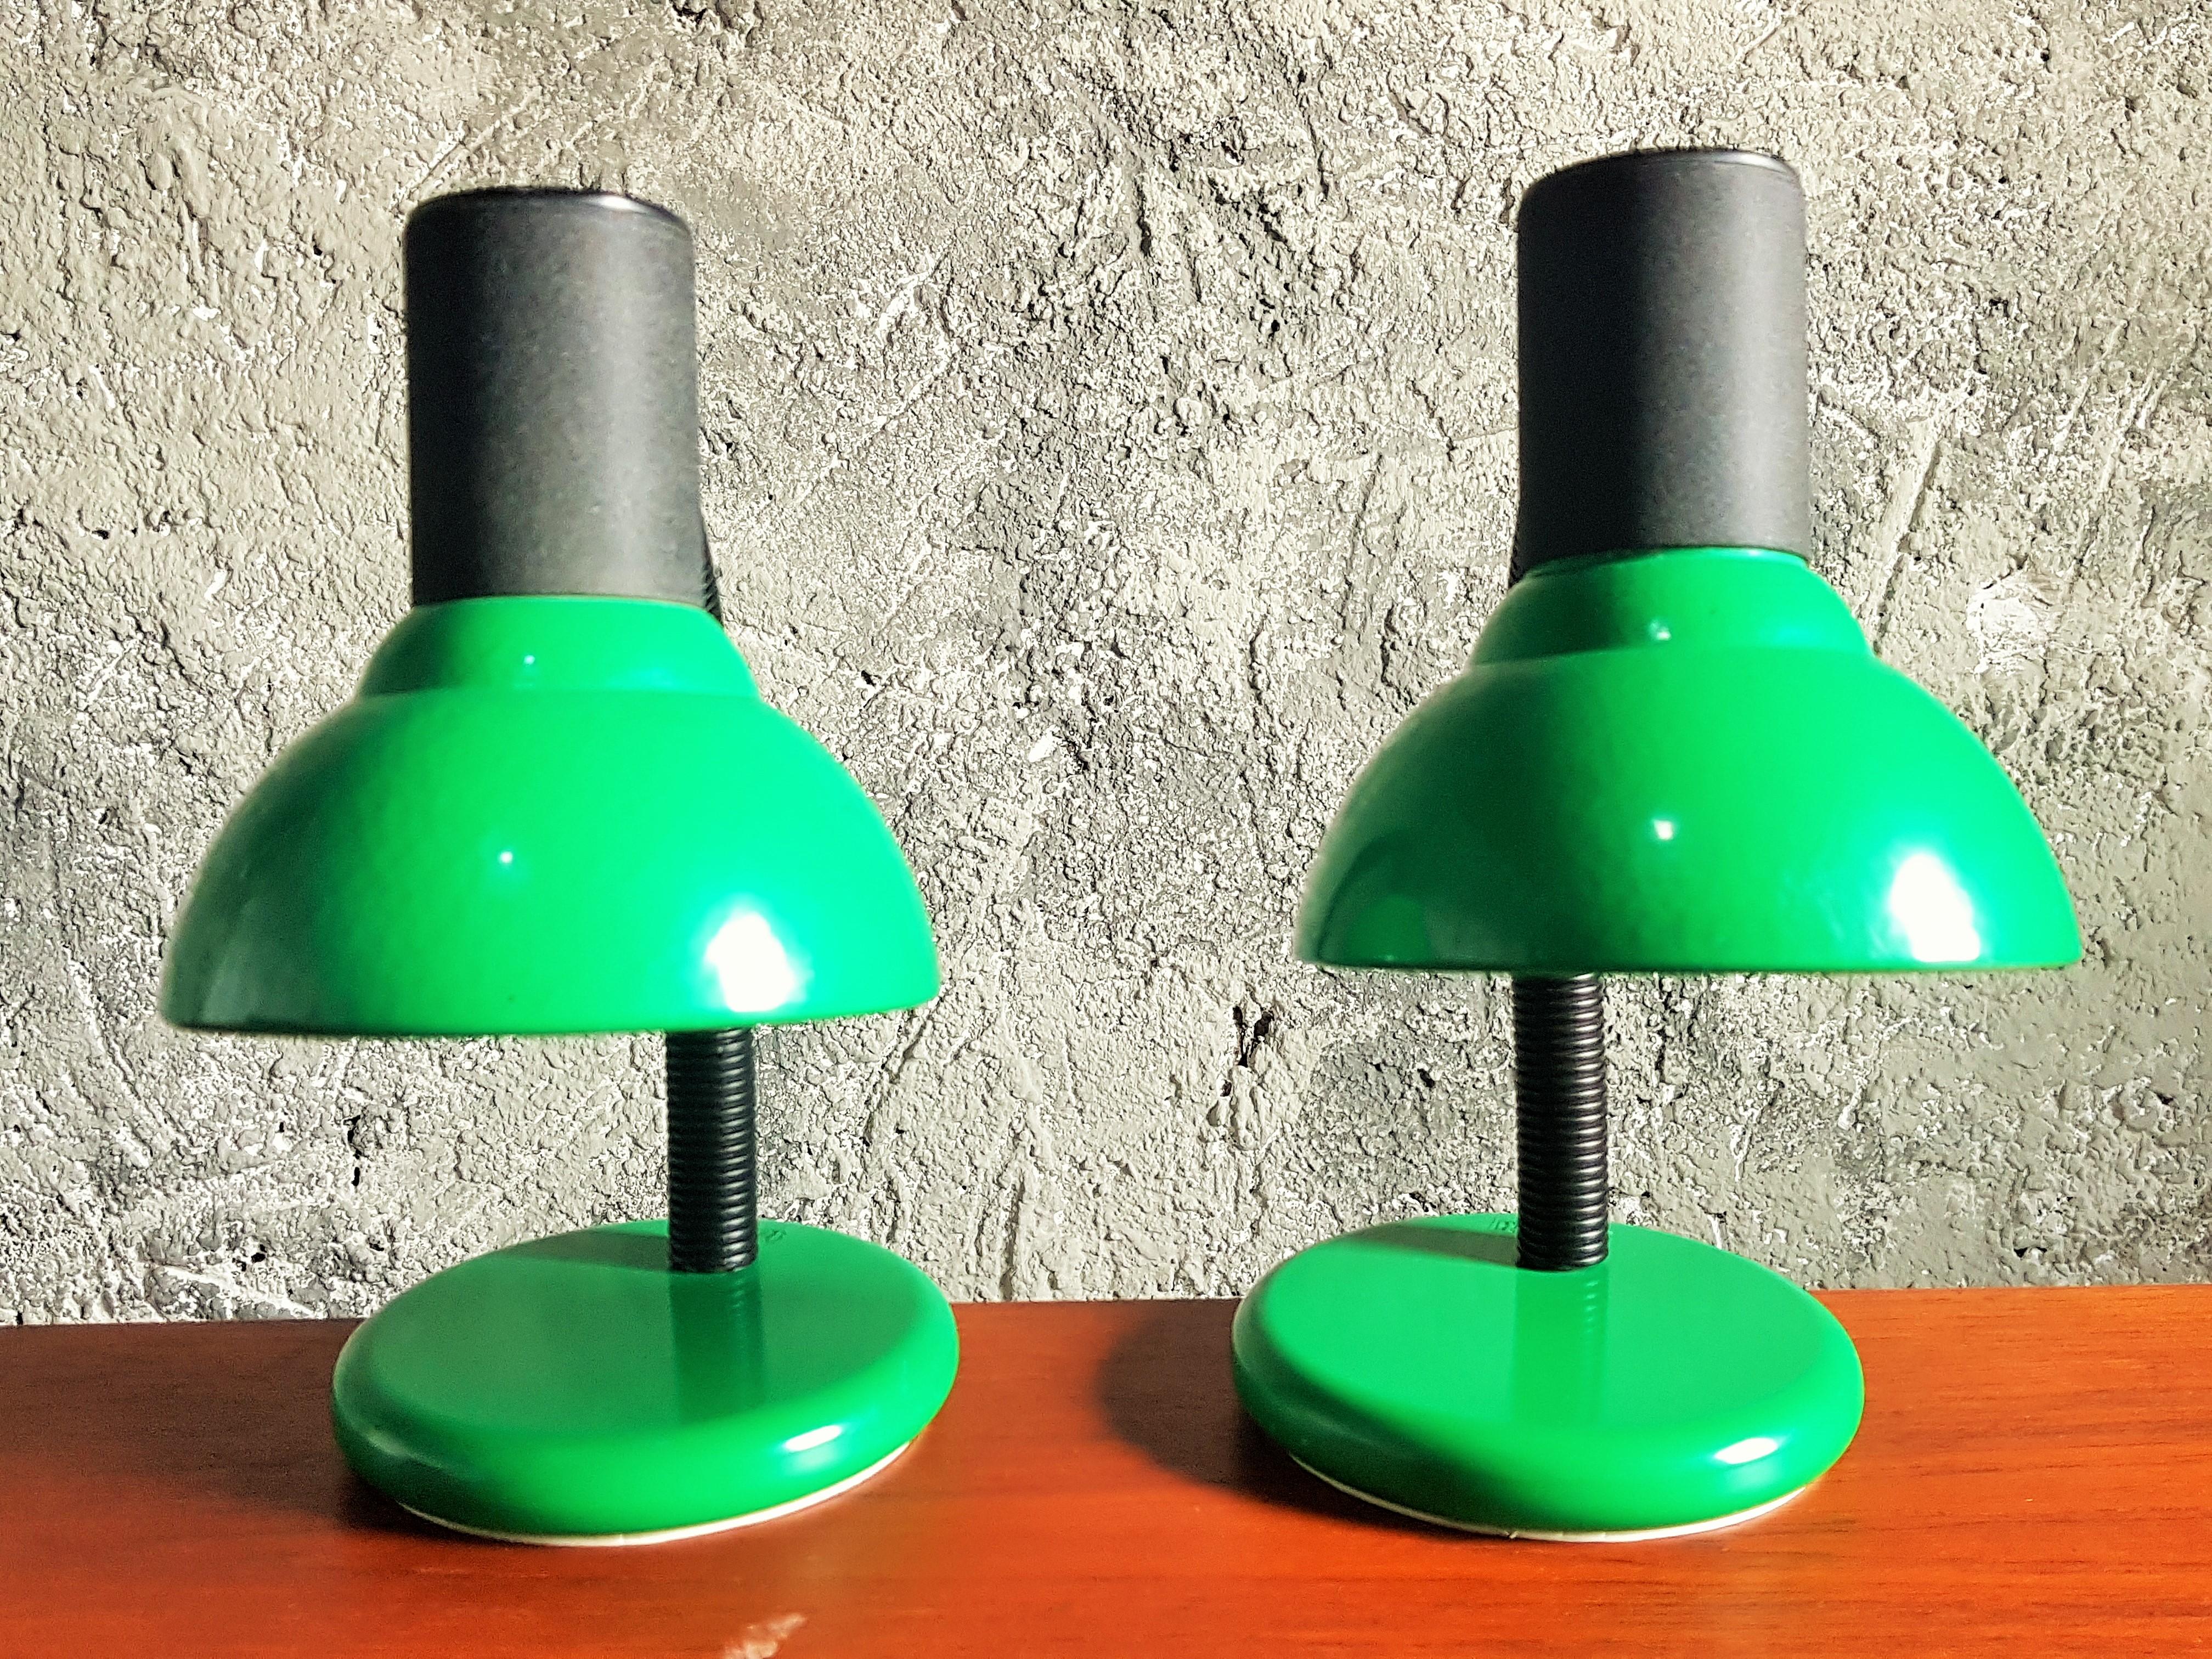 Post-Modern Midcentury Pair of Table Desk Lamps, Targetti, Italy, 1982 For Sale 7